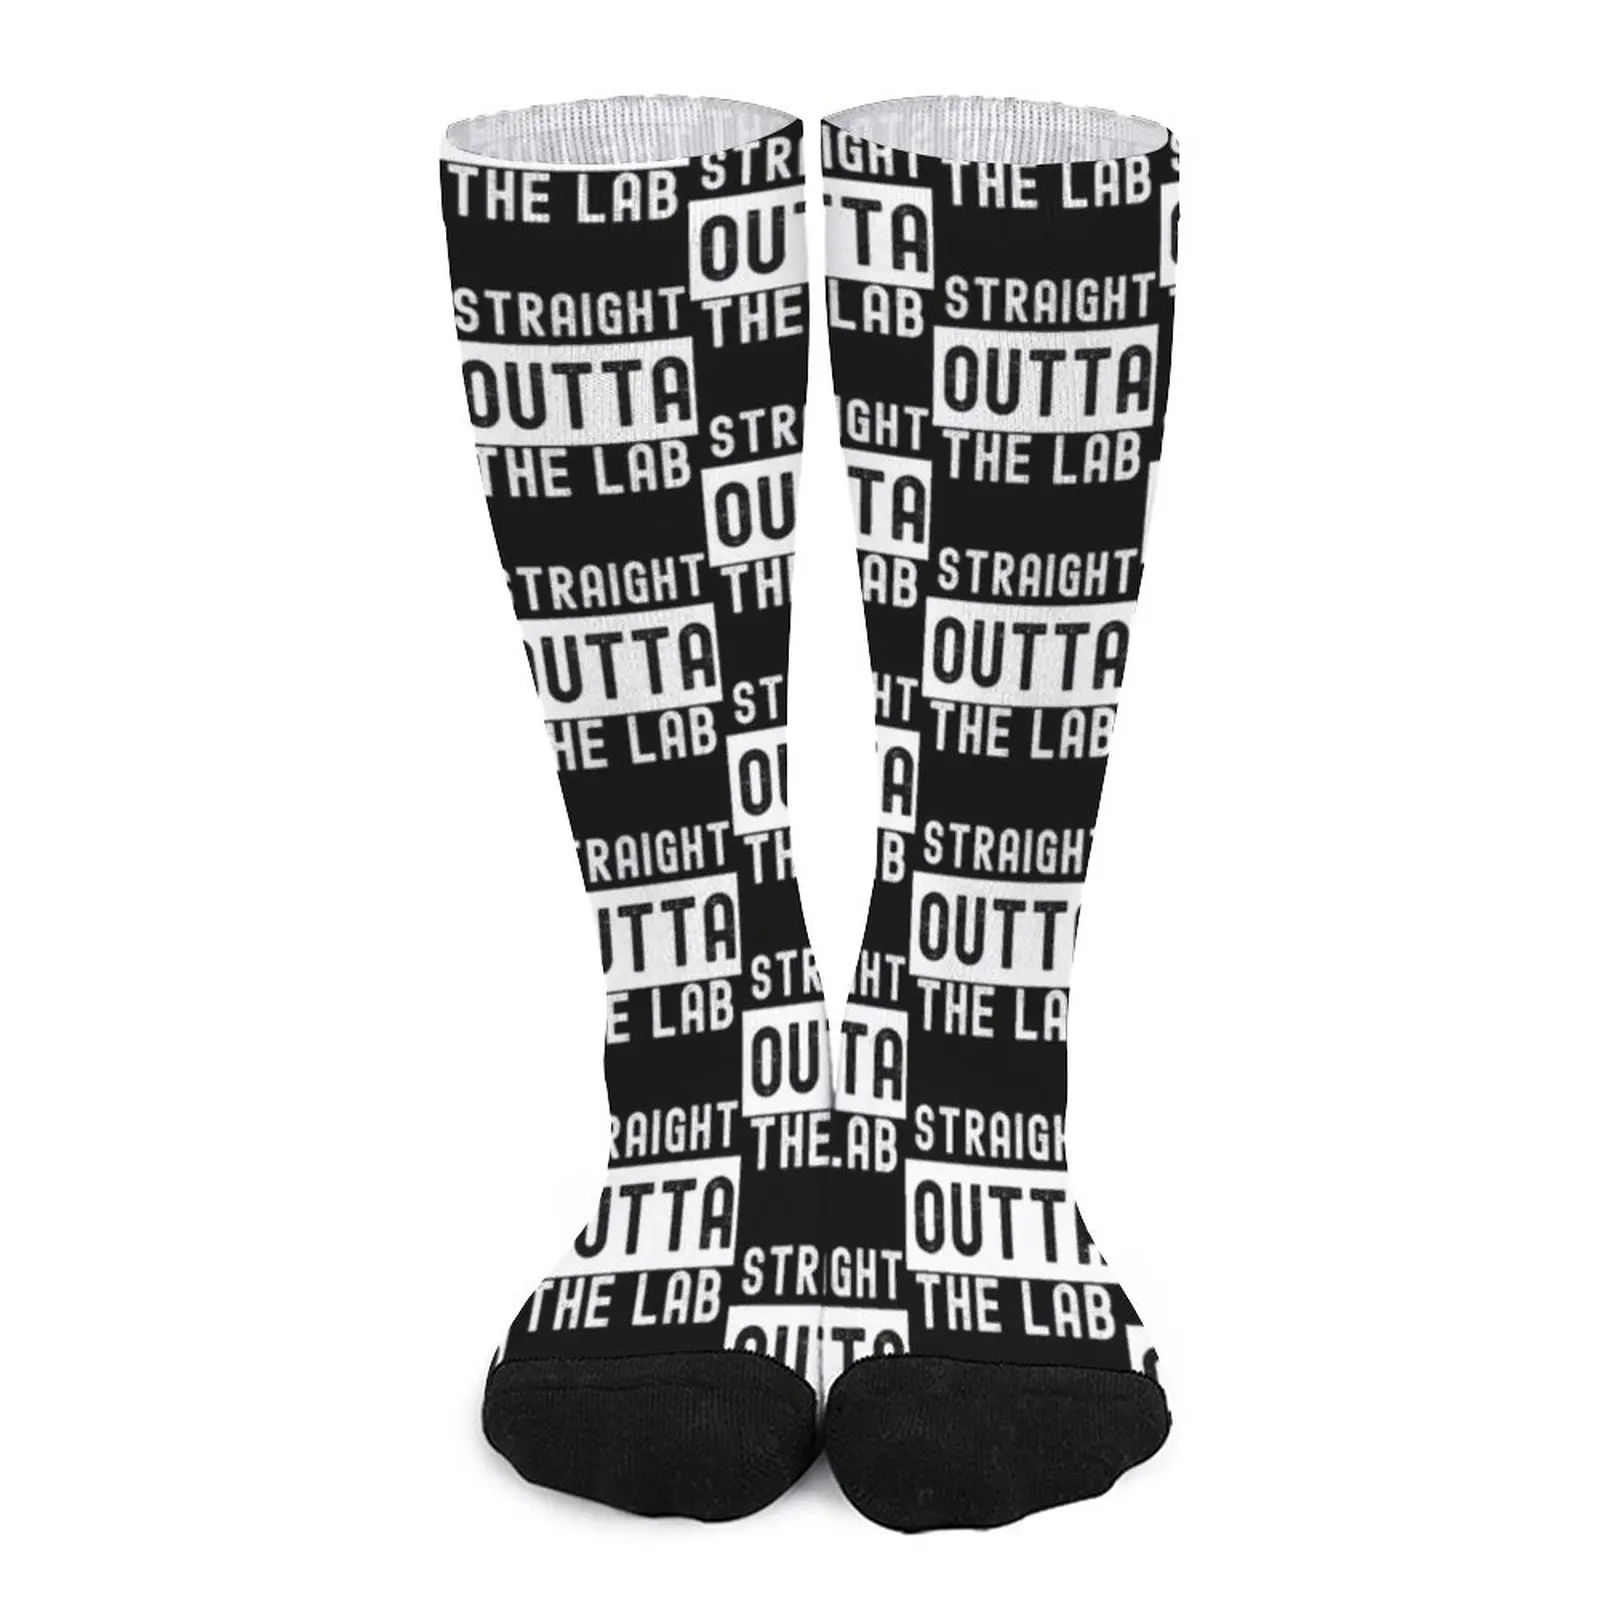 hip hop trendy letter printed straight casual pants for men and women american vibe loose fitting sports wide leg pants STRAIGHT OUTTA THE LAB LABLIFE Medical Laboratory Scientist FUNNY Socks Sports socks sports socks men cool socks Men gift